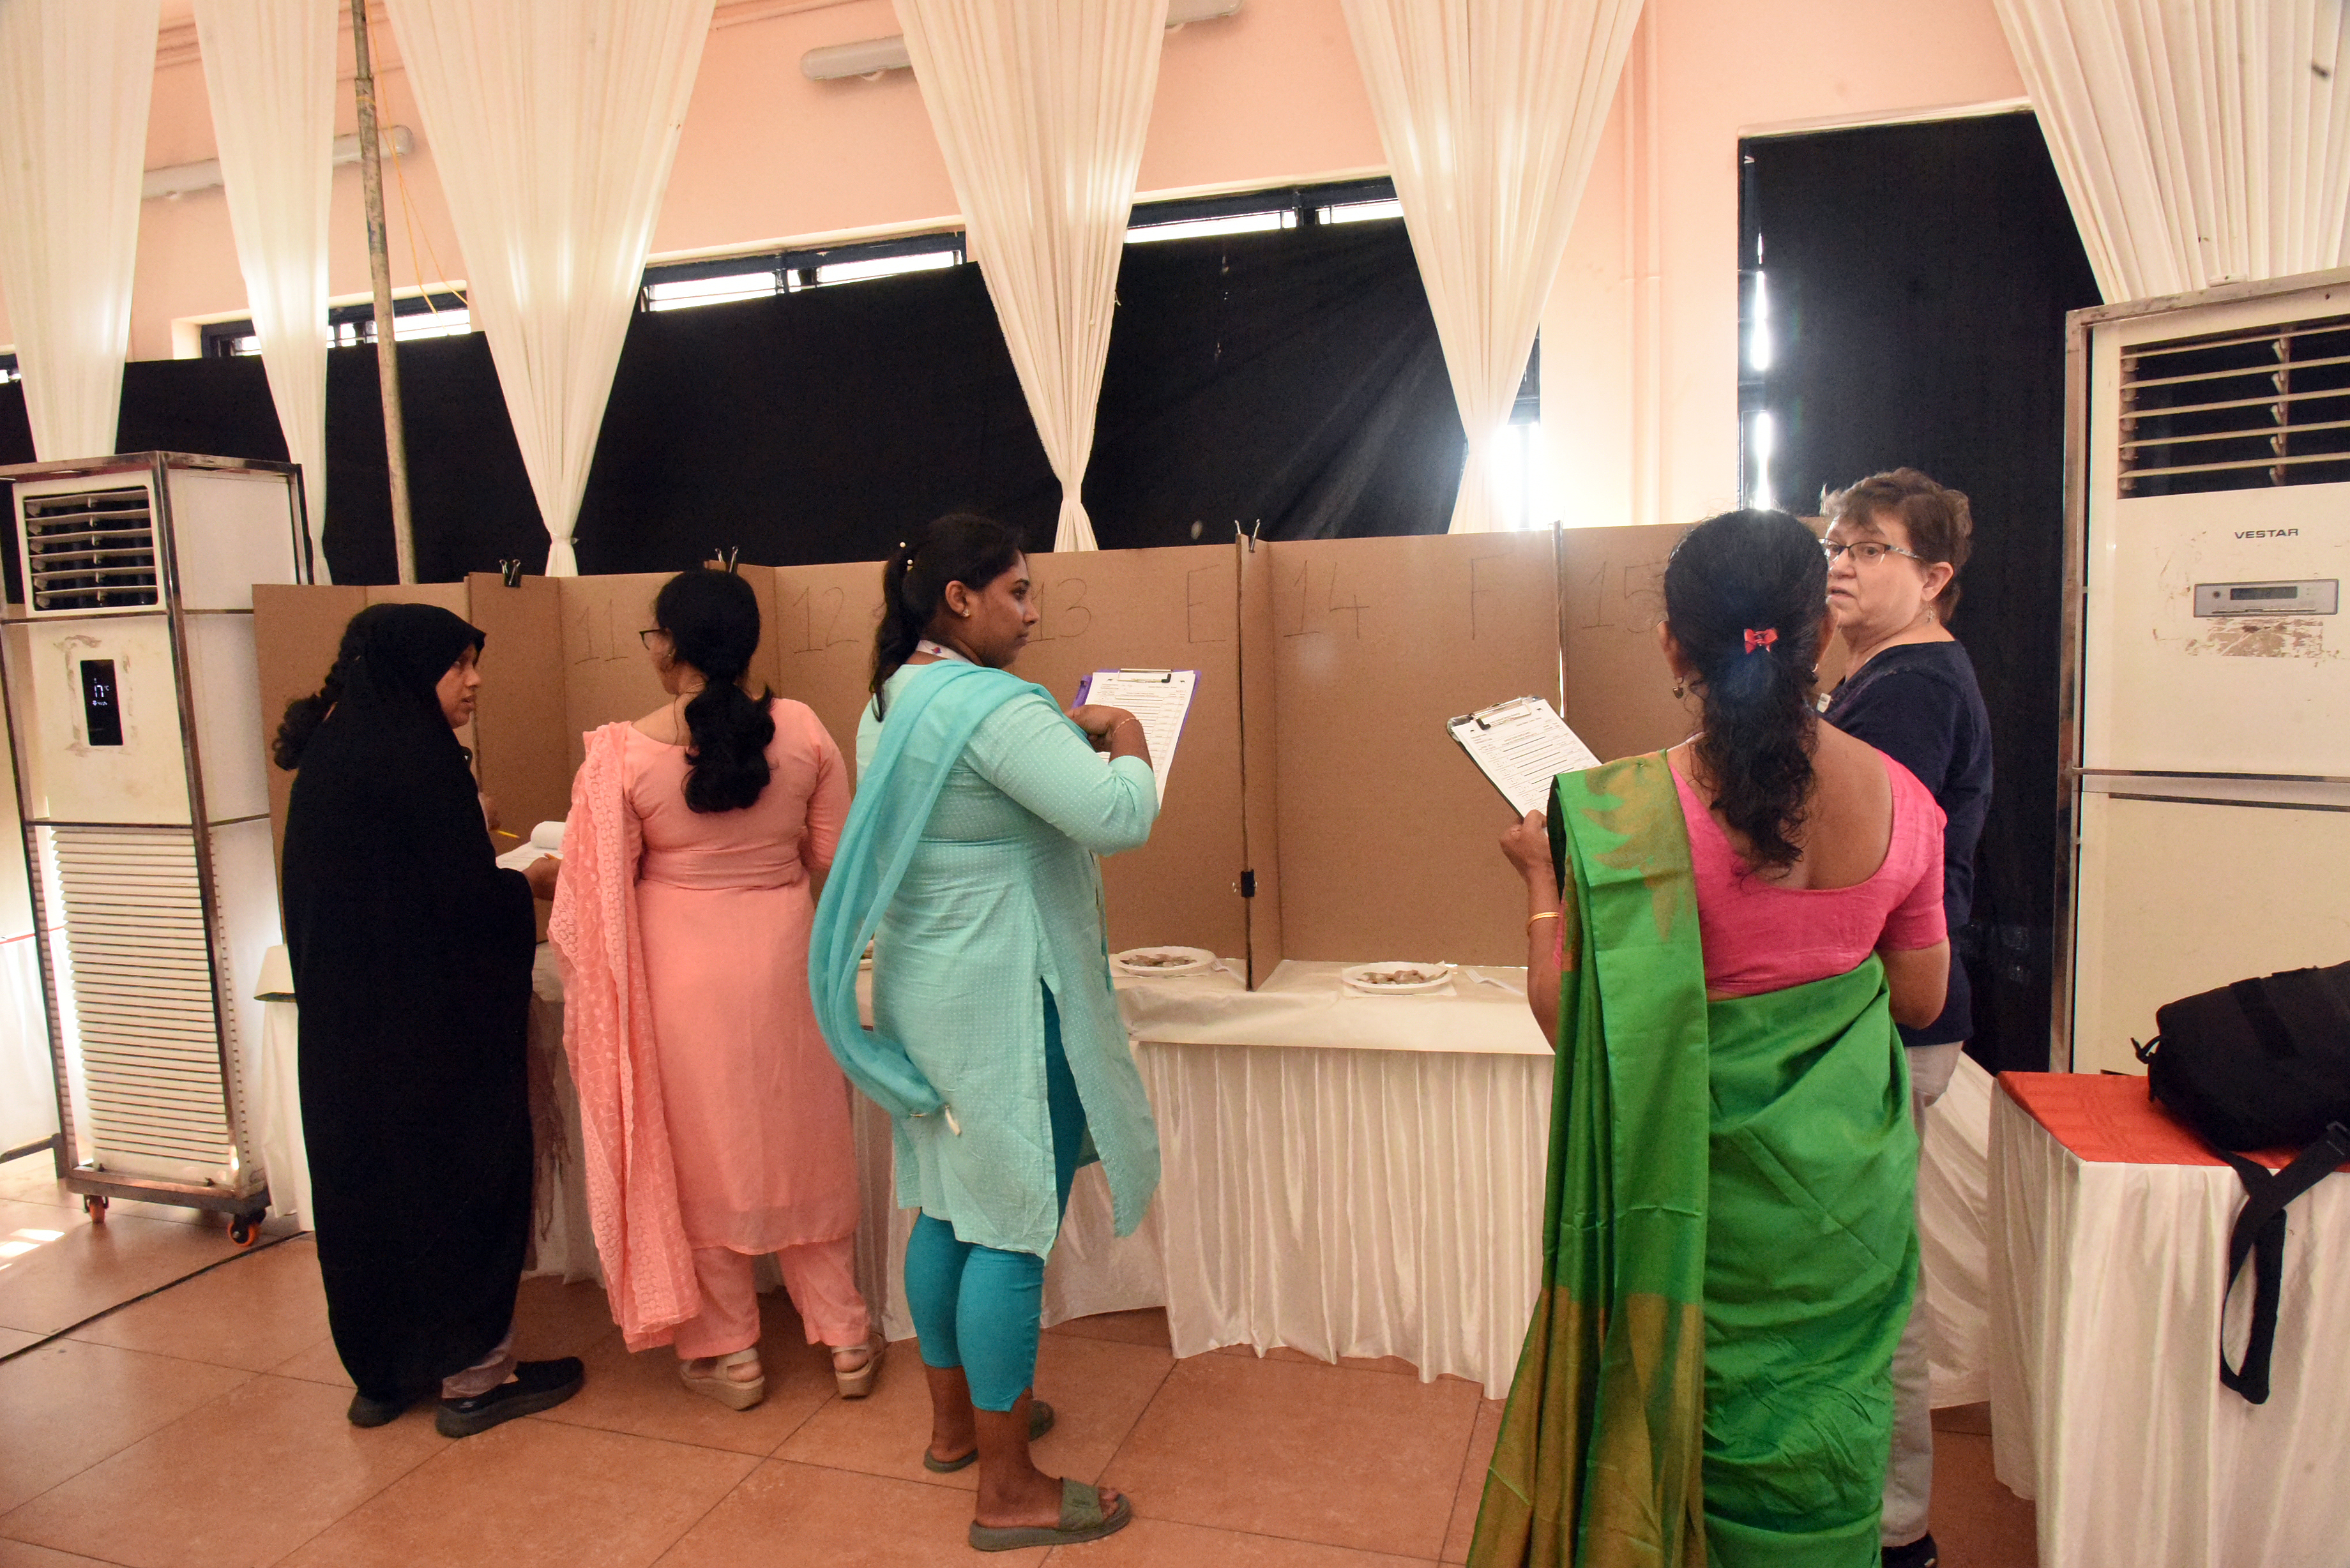 Indian women participating in the trainings record observations on the shrimp.